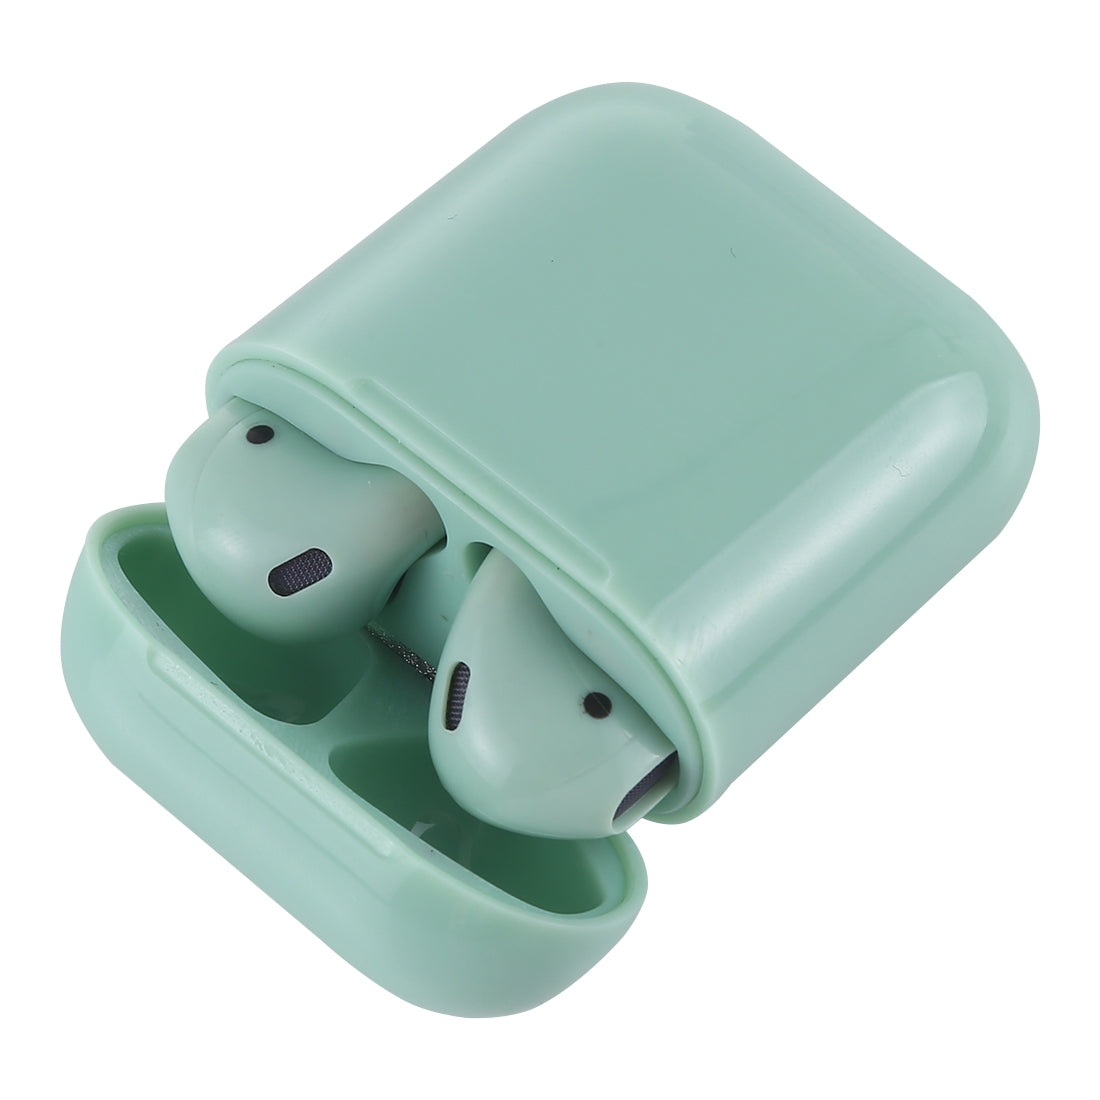 i12-XS TWS Binaural Calls Wireless Bluetooth Earphones with Charging Case, Support Touch Calling 5.0(Green)